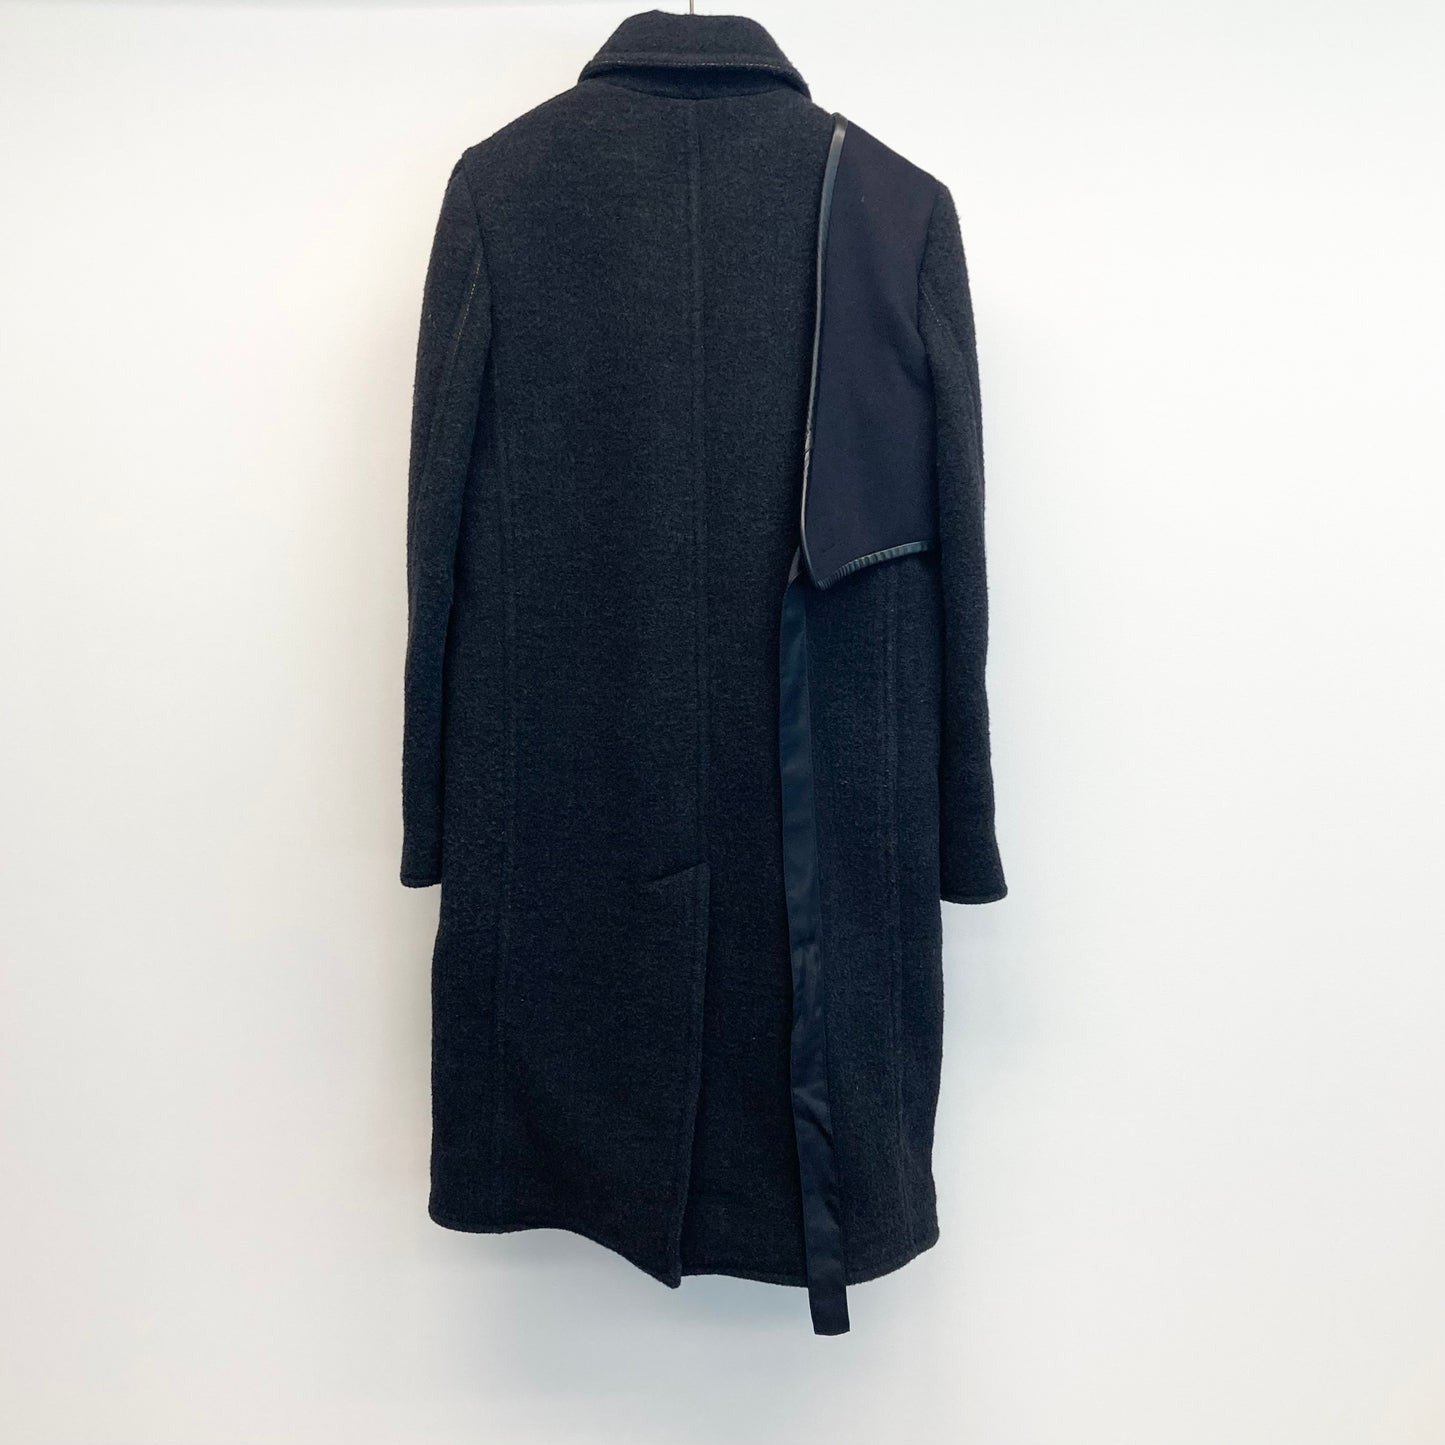 Fall2015 Celine by Phoebe philo Coat with Holder